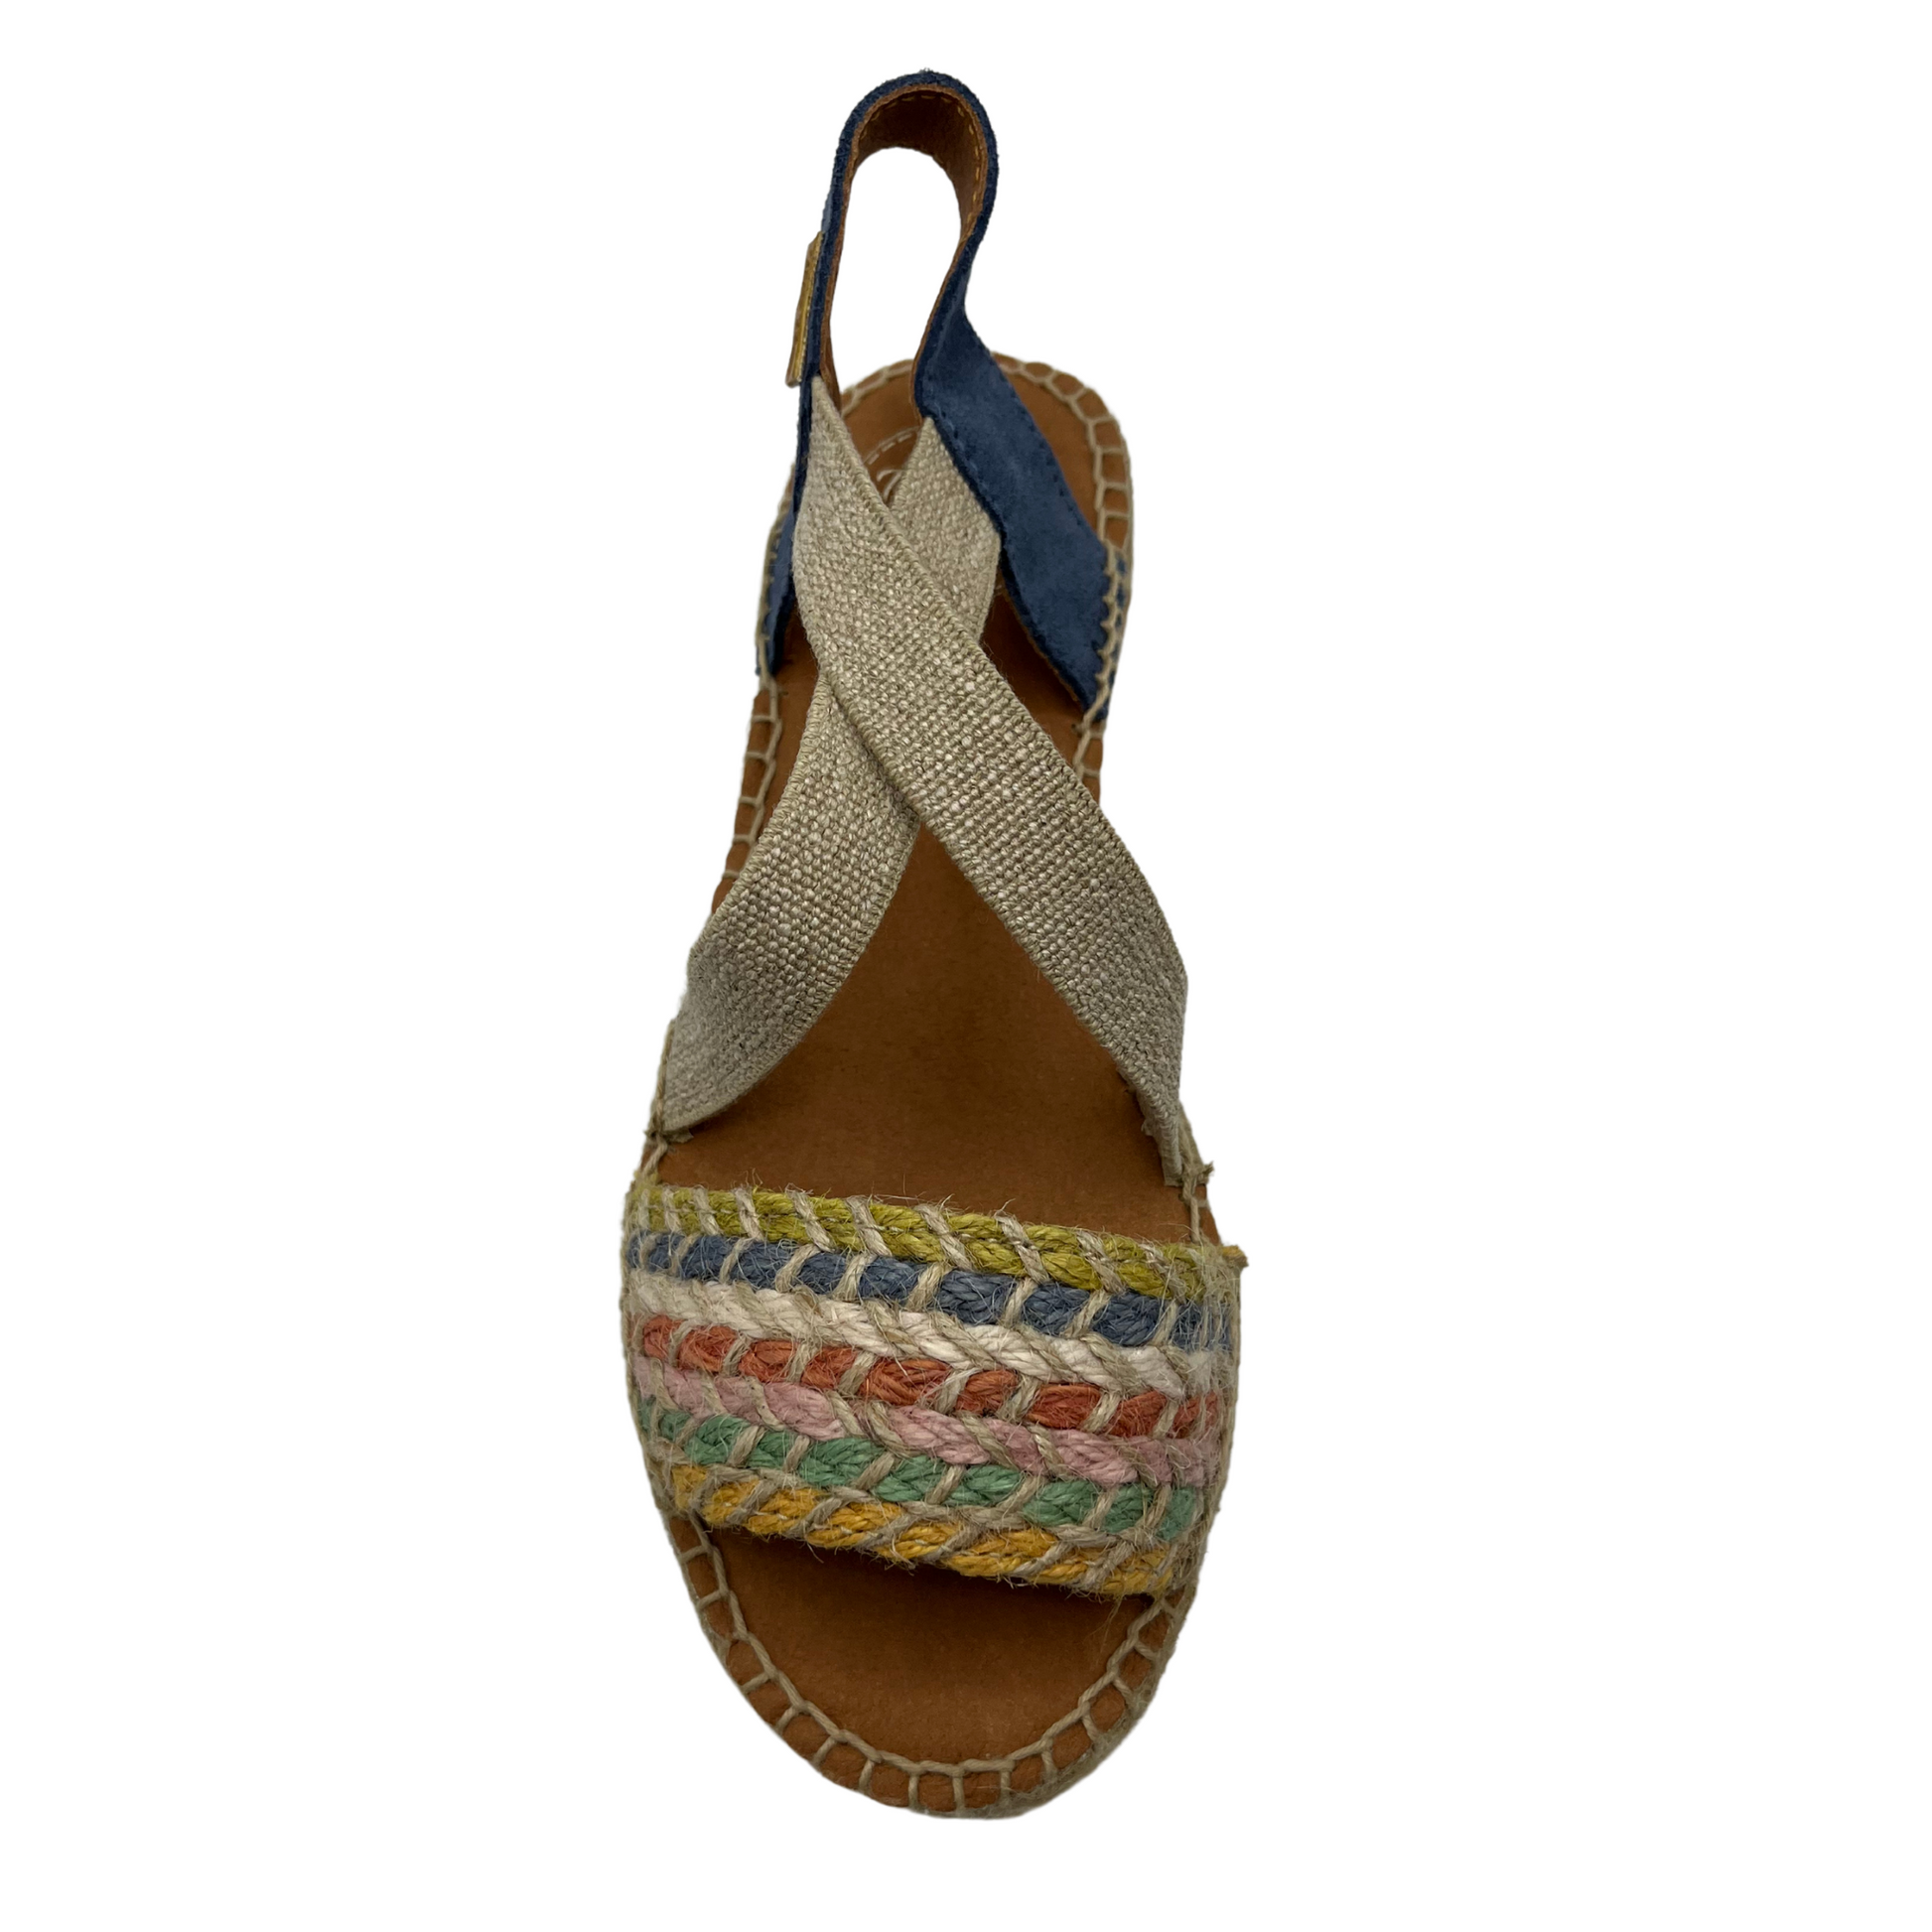 Top view of women's espadrille with non-slip rubber bottom and hand stitched details.